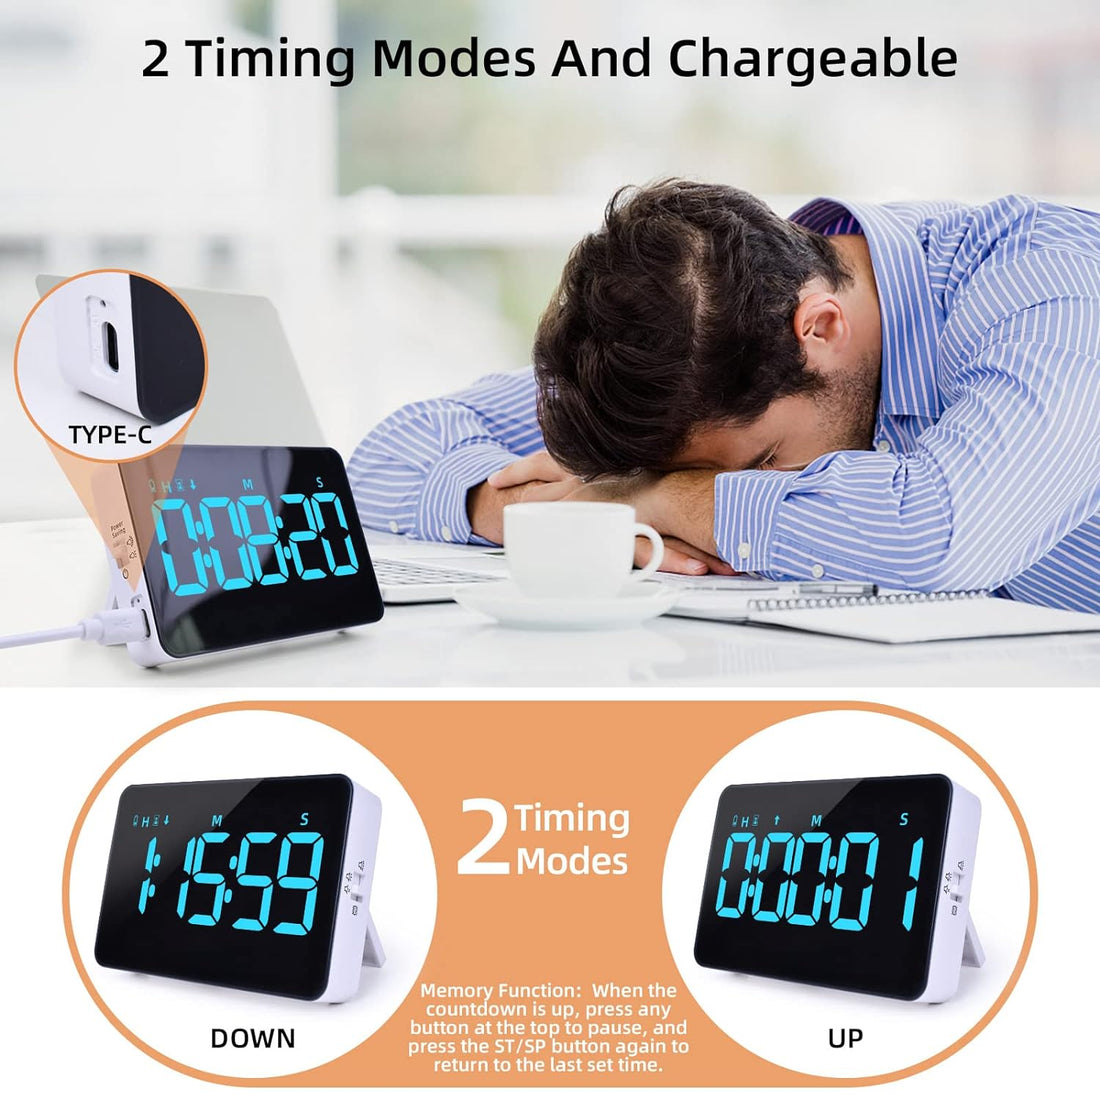 2 Packs Rechargeable Digital Classroom Timer Kitchen Timer, Magnetic Timers with Countdown/up with 5”LED Display 3 Brightness 4 Volume Adjustable for Classroom Office Home Work Study Fitness (Blue)